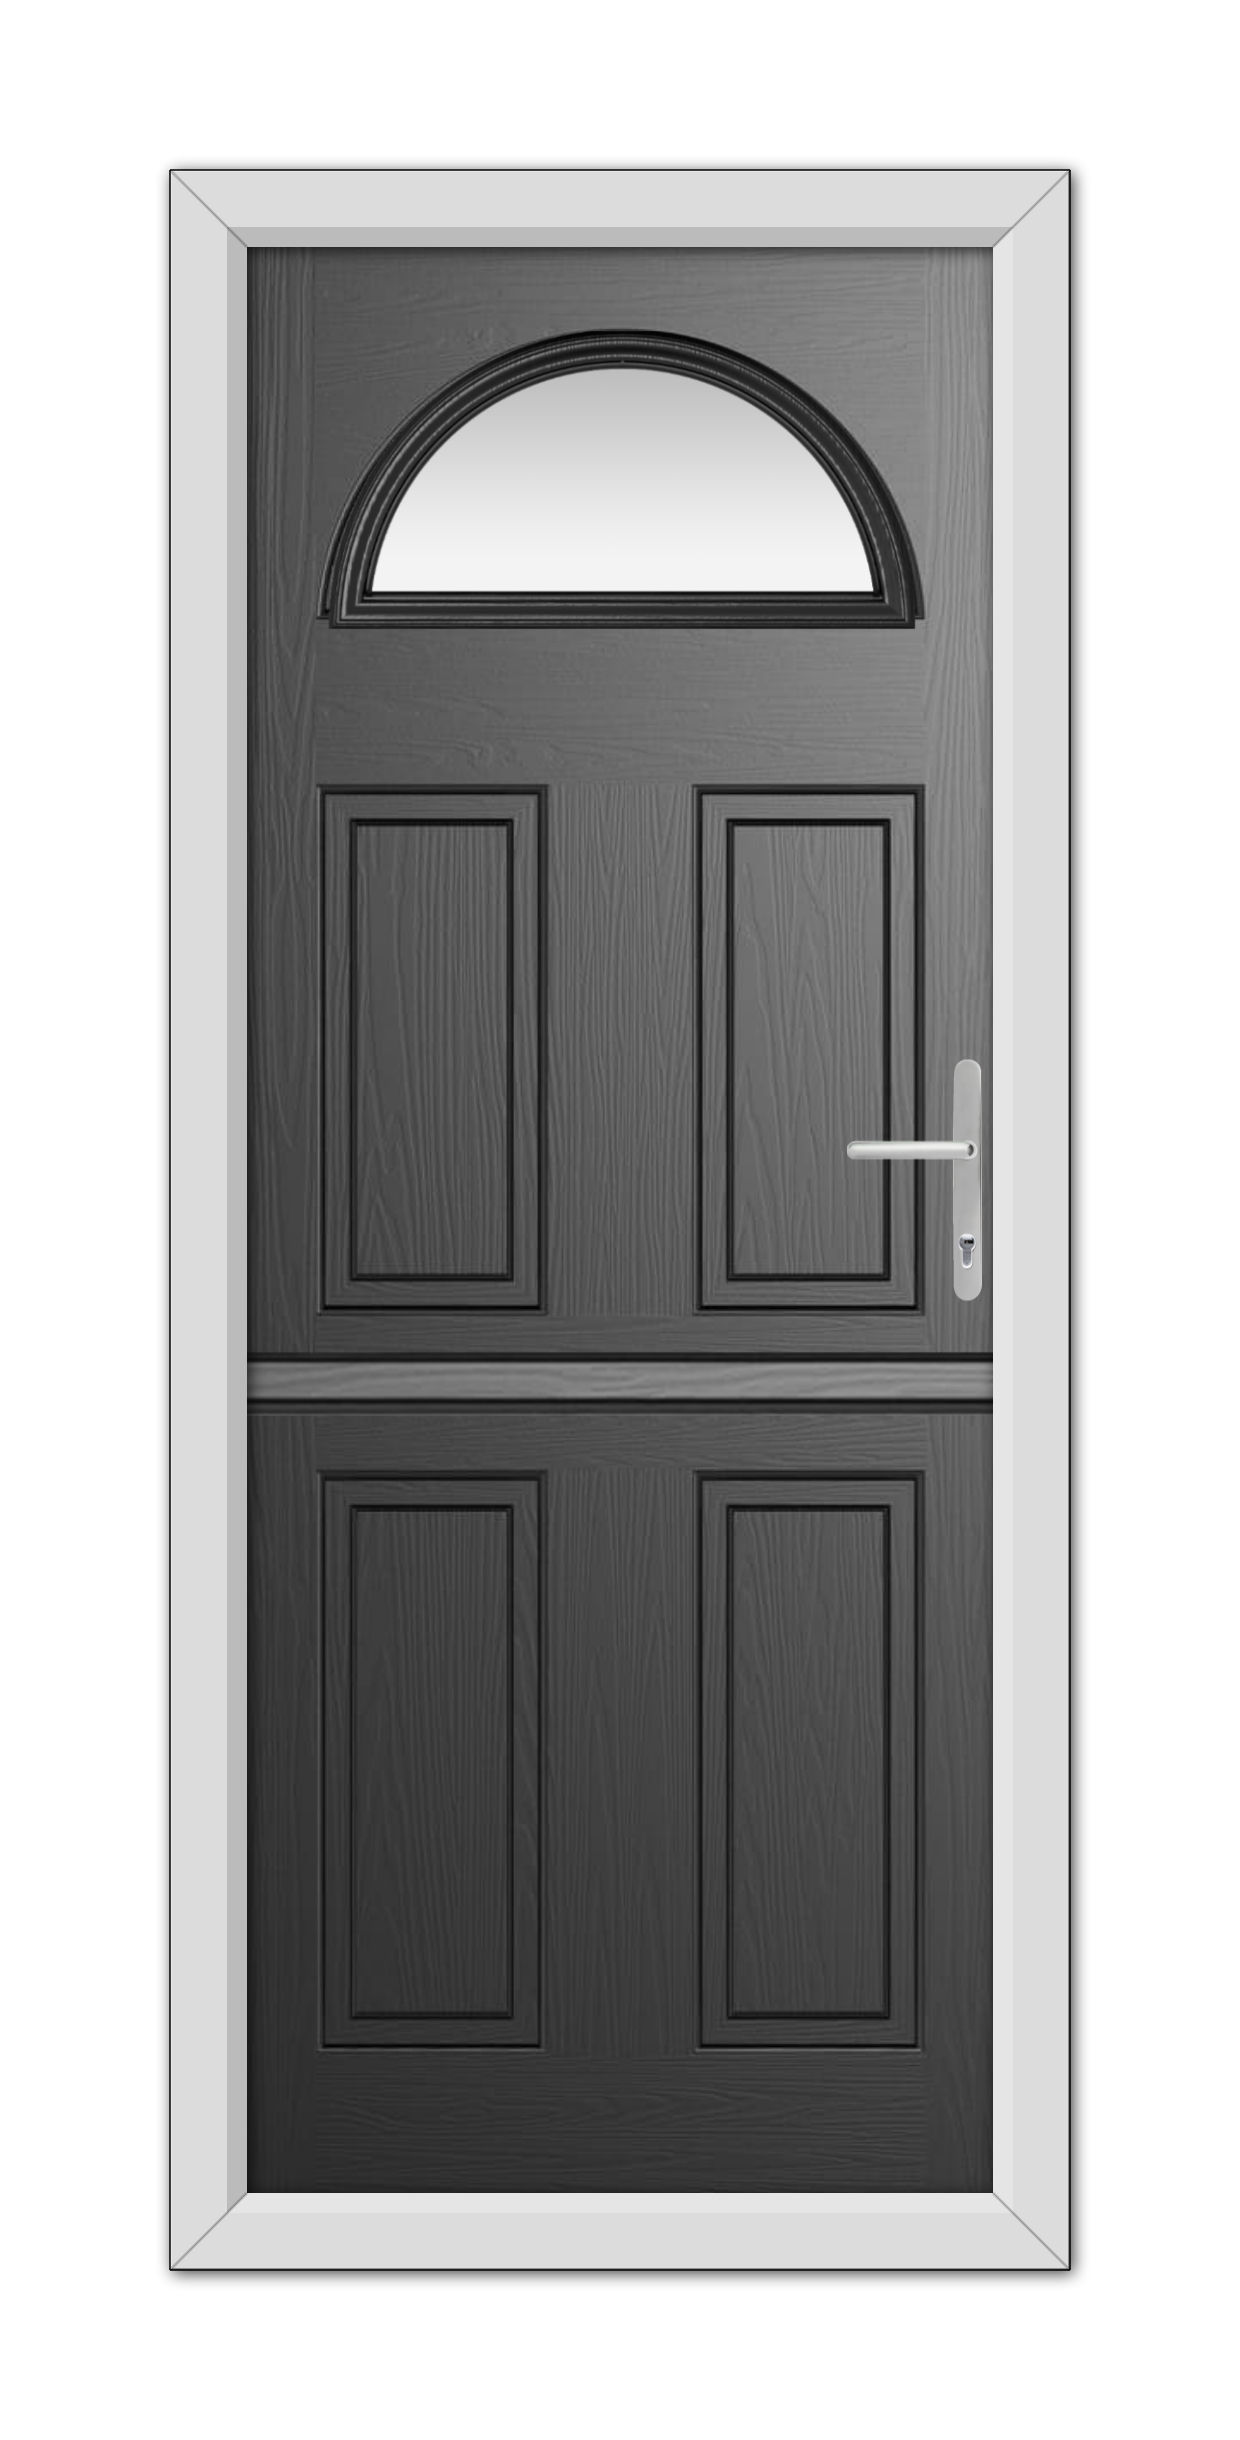 A modern Black Winslow 1 Stable Composite Door 48mm Timber Core with six panels and a semi-circular window at the top, framed in white, with a metal handle on the right.